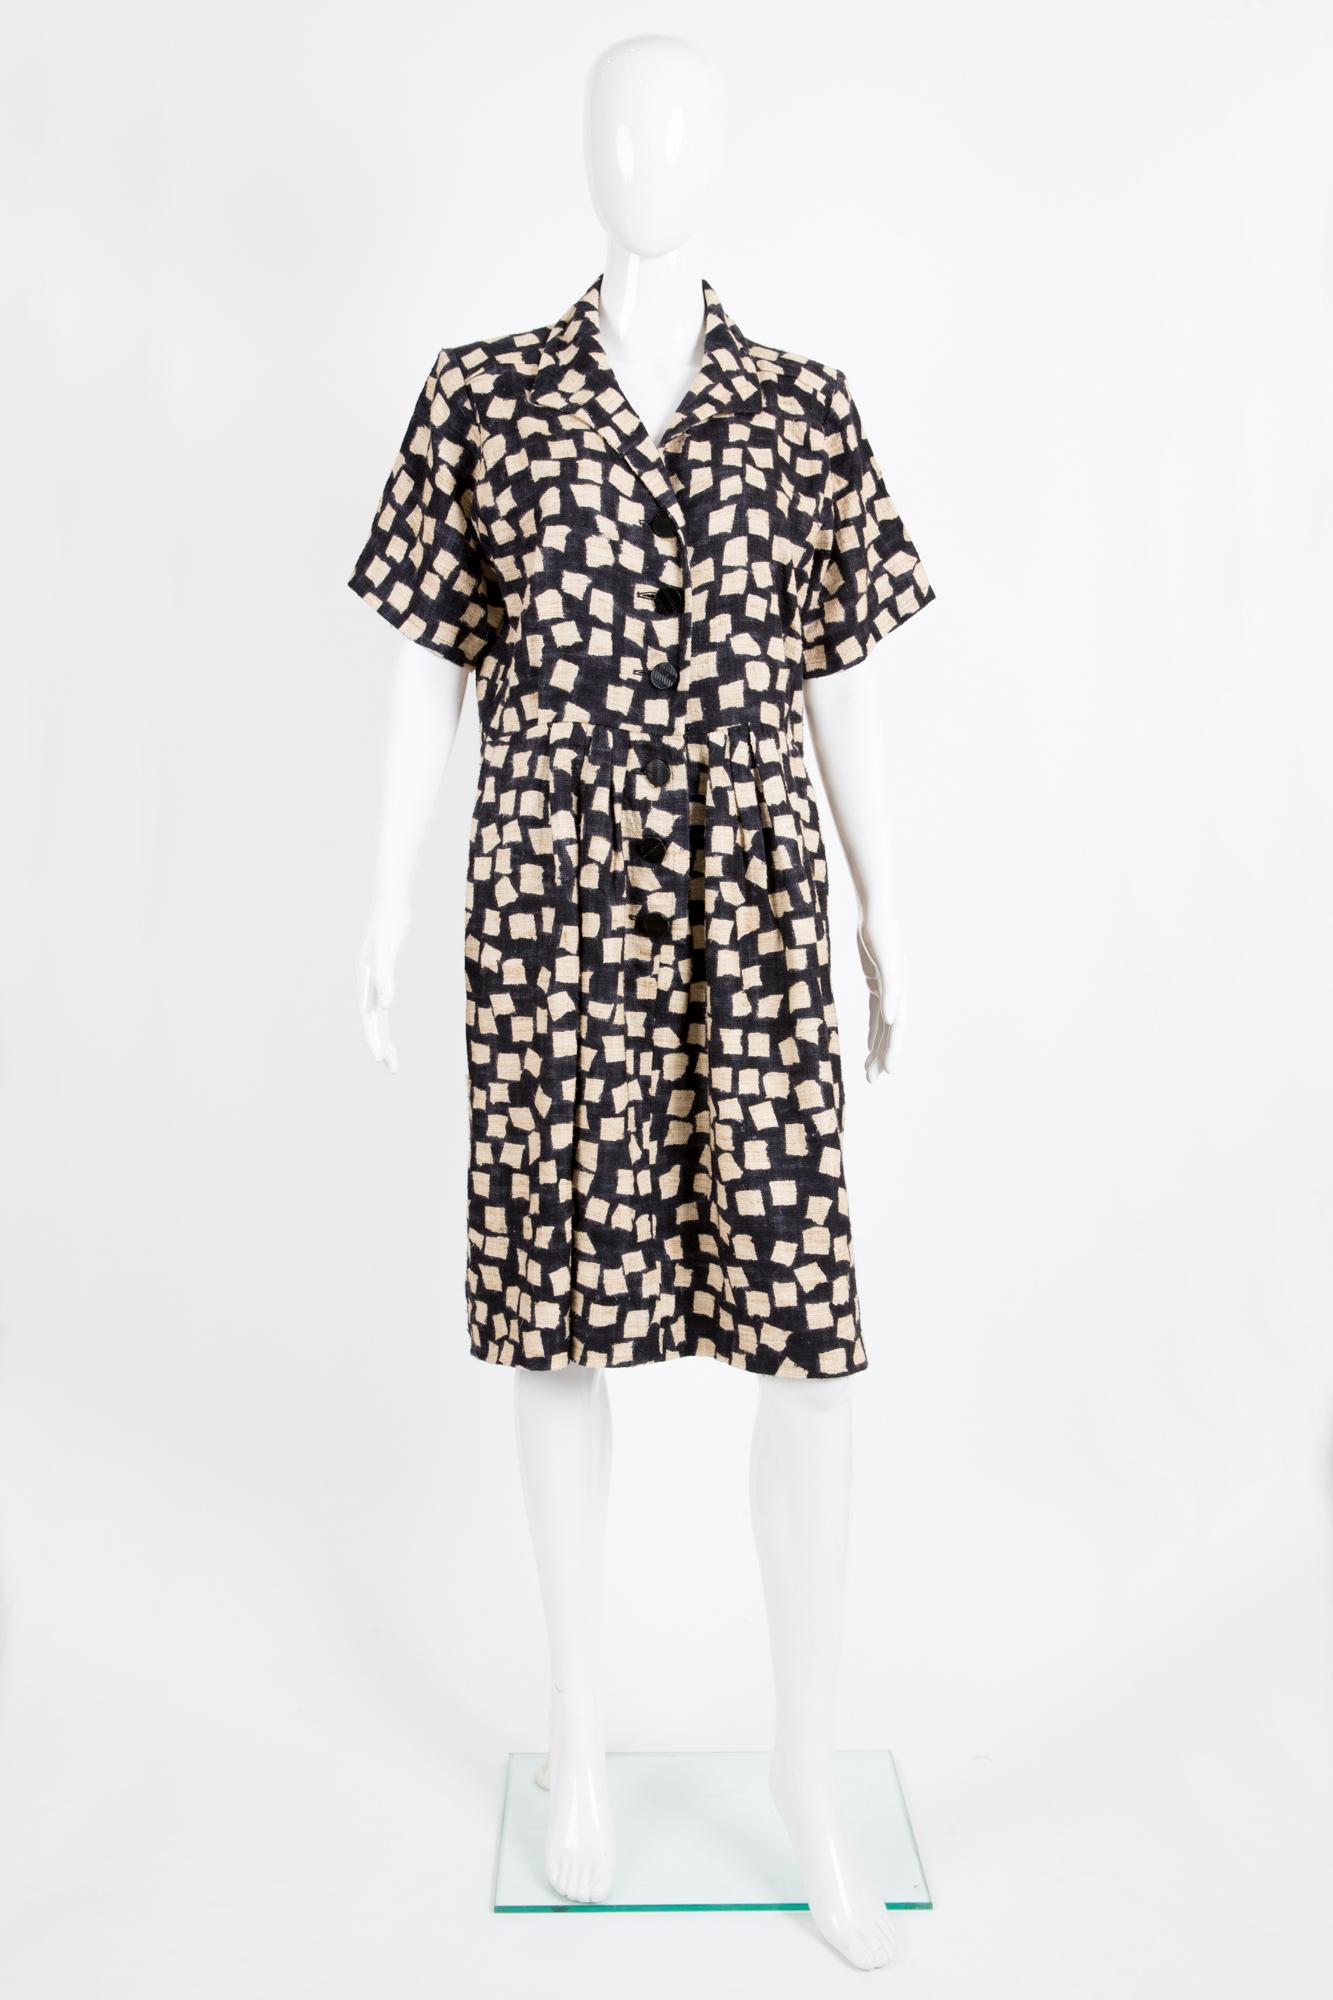 1994s Summer catwalk Yves Saint Laurent raw silk dress featuring front button opening, short sleeves, an african ethnic print. See Catwalk photos.
100% raw silk
In excellent vintage condition. Made in France. 
Estimated size 40fr/US8/UK12
We